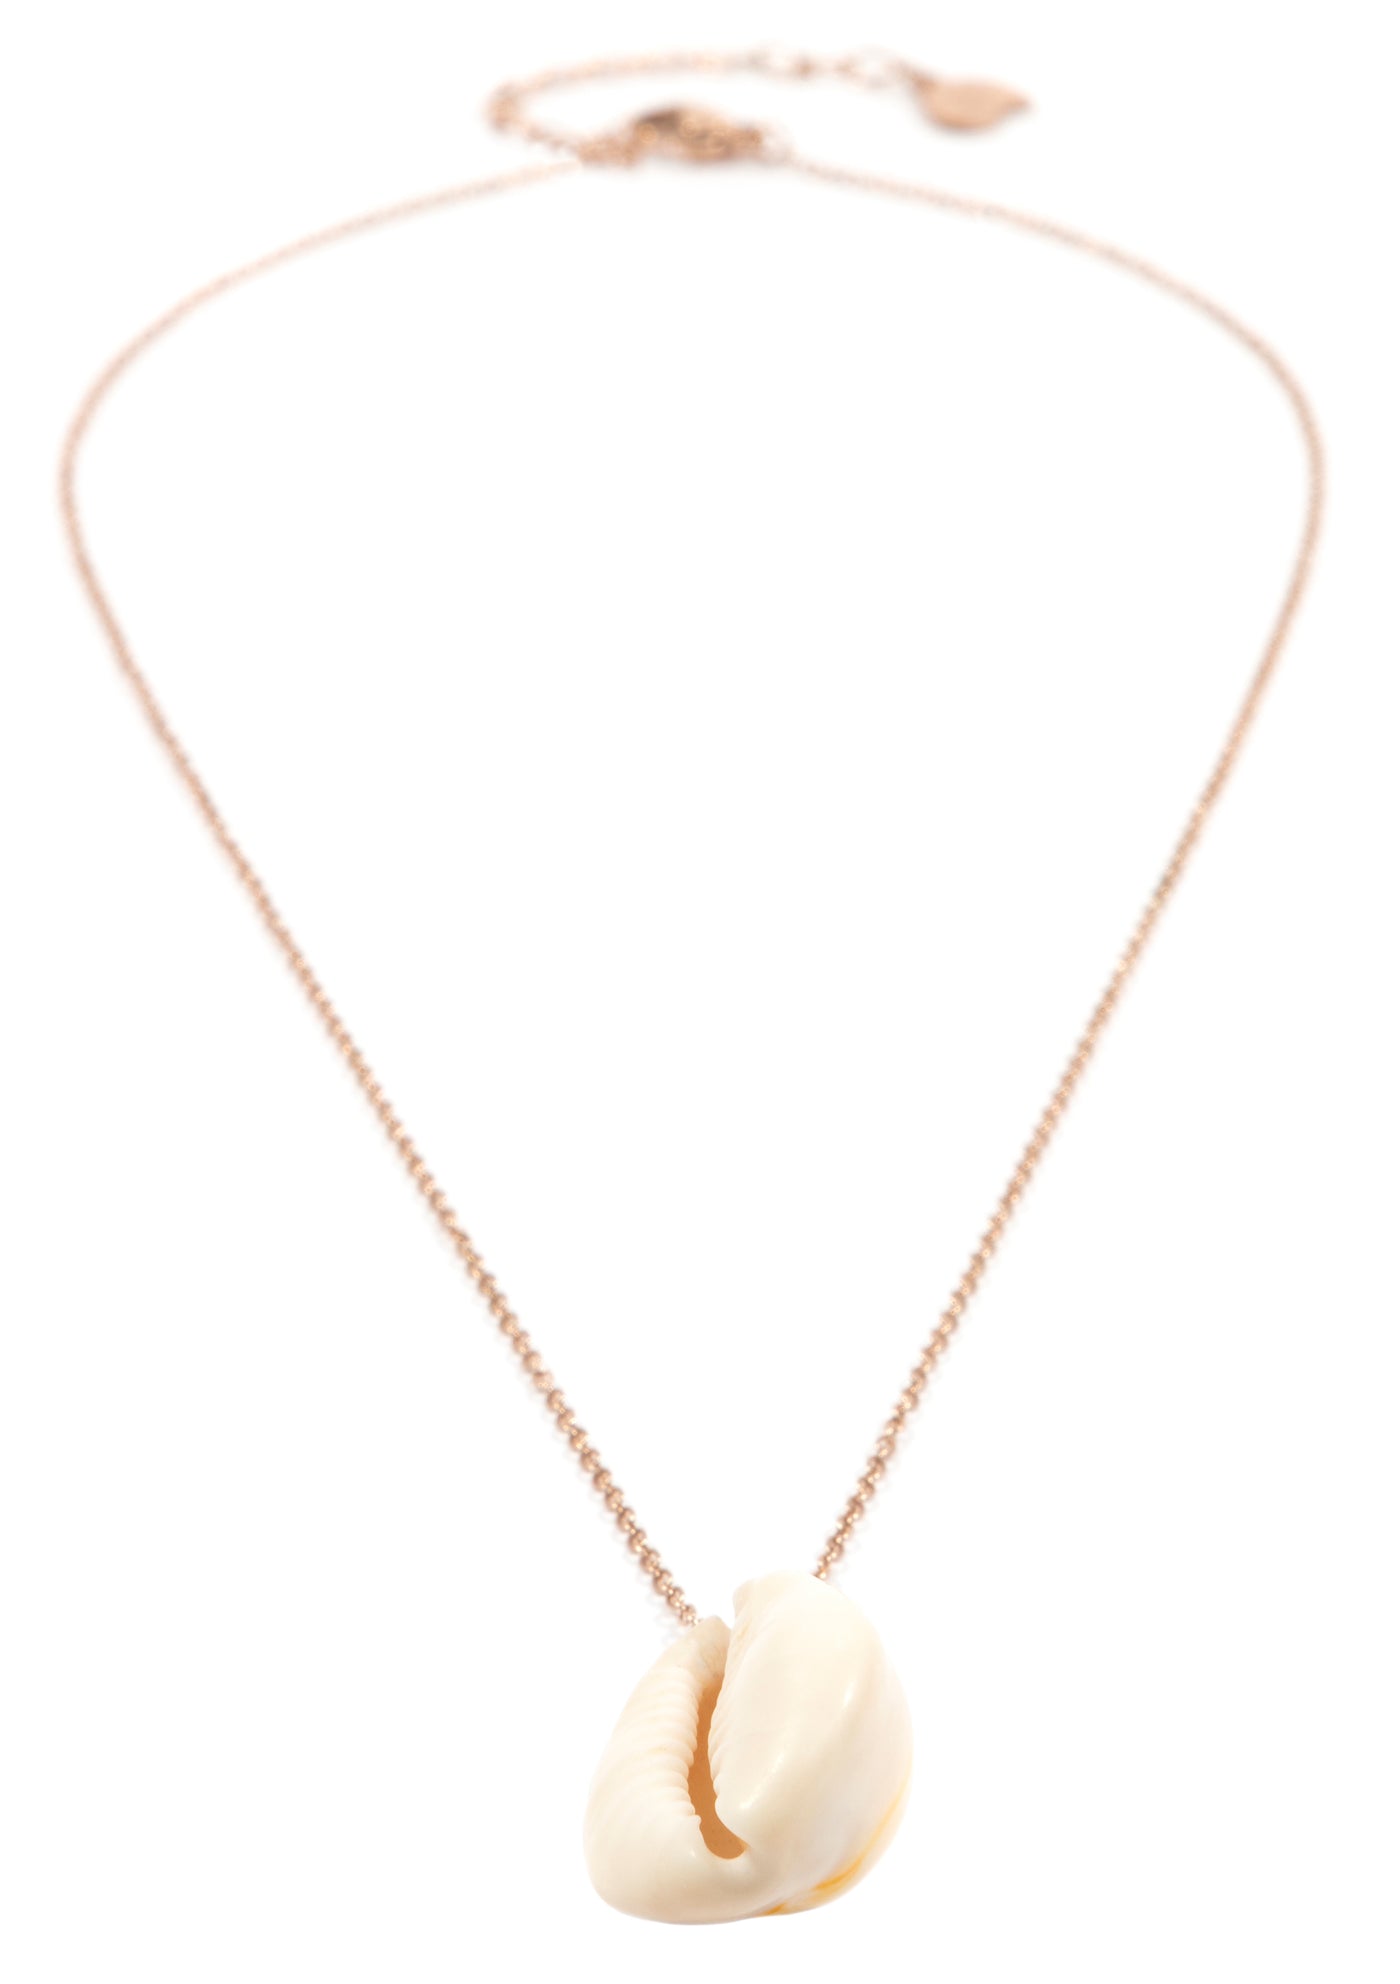 Sea Shell Pendant Necklace Rose Gold